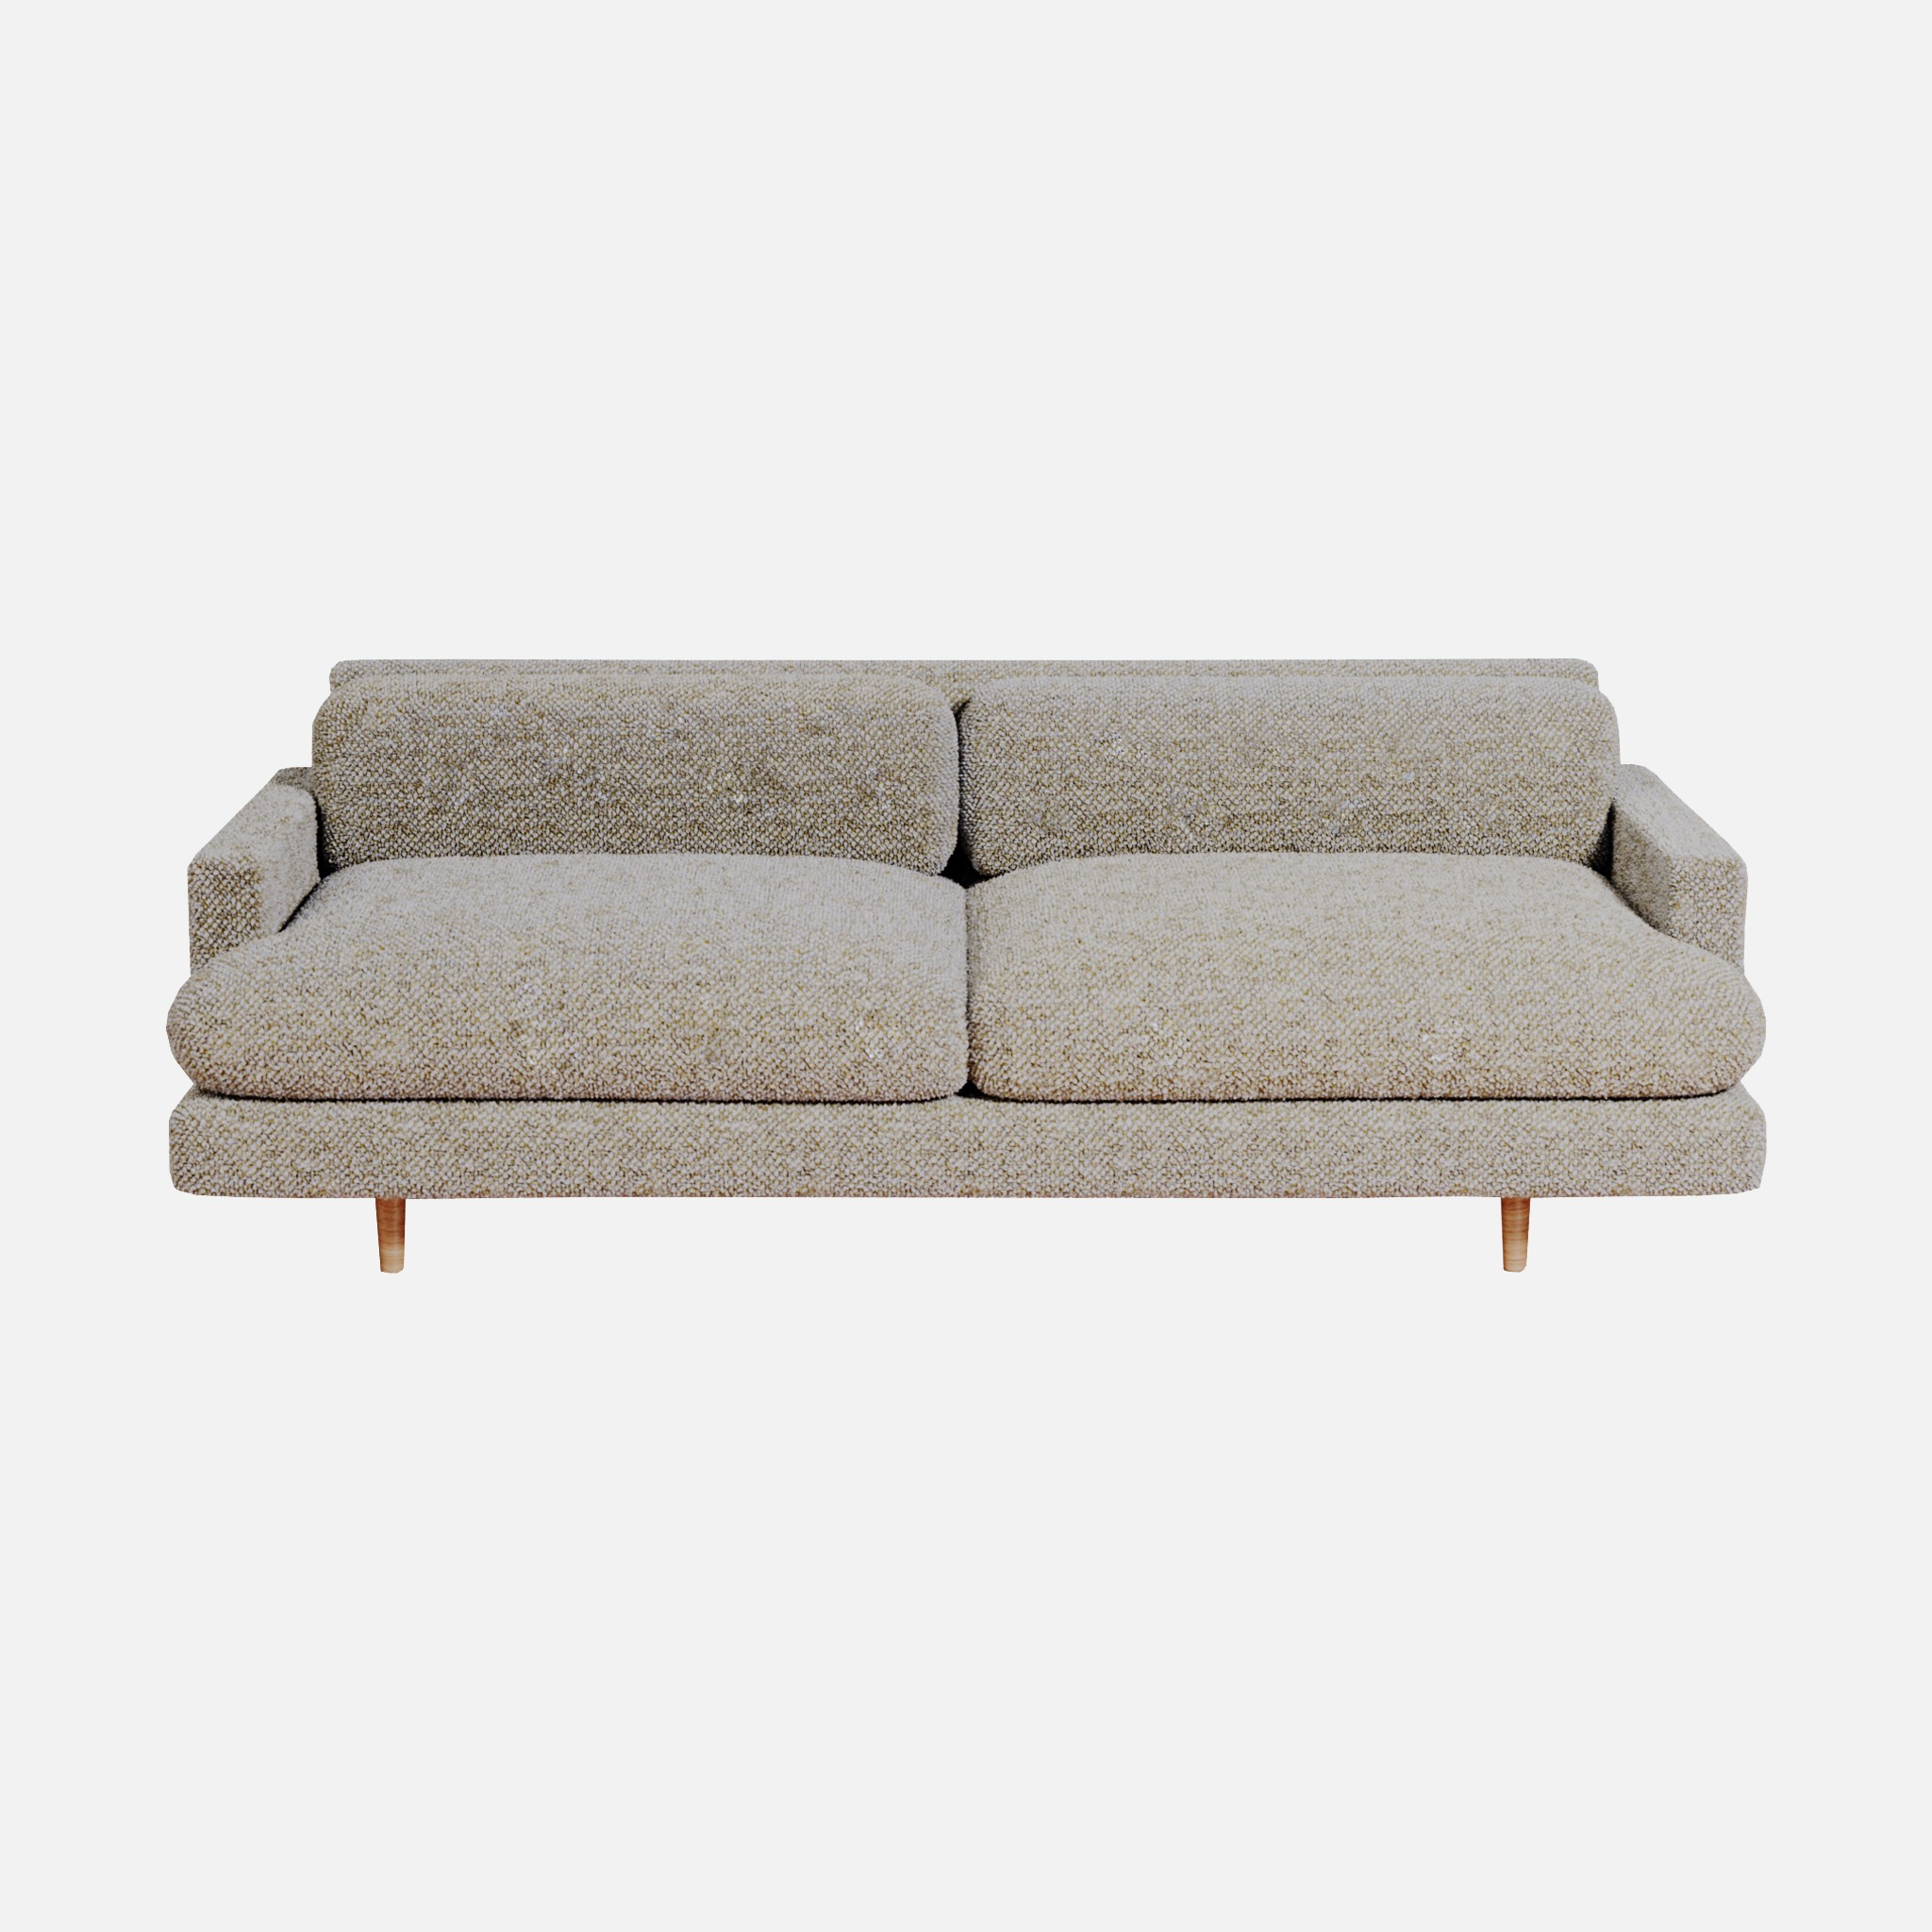 a beige couch with a wooden legs